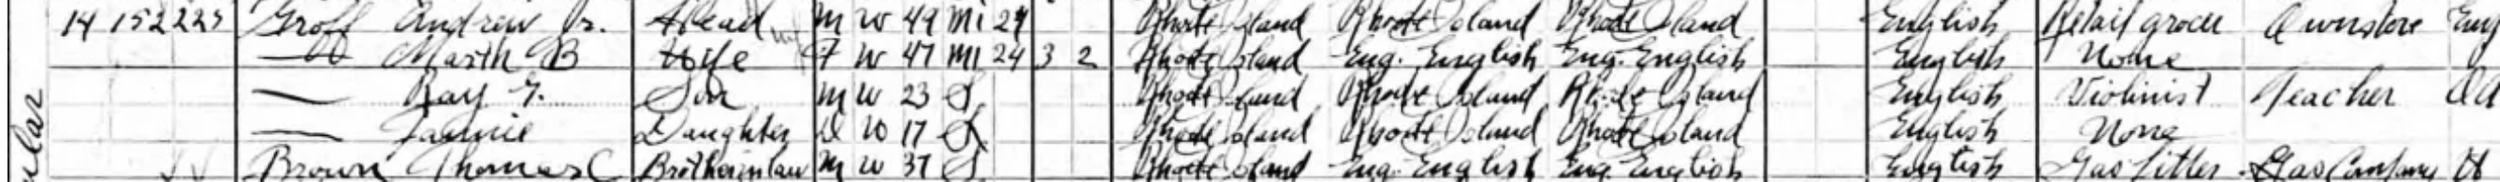 Excerpt from the 1910 United States Census